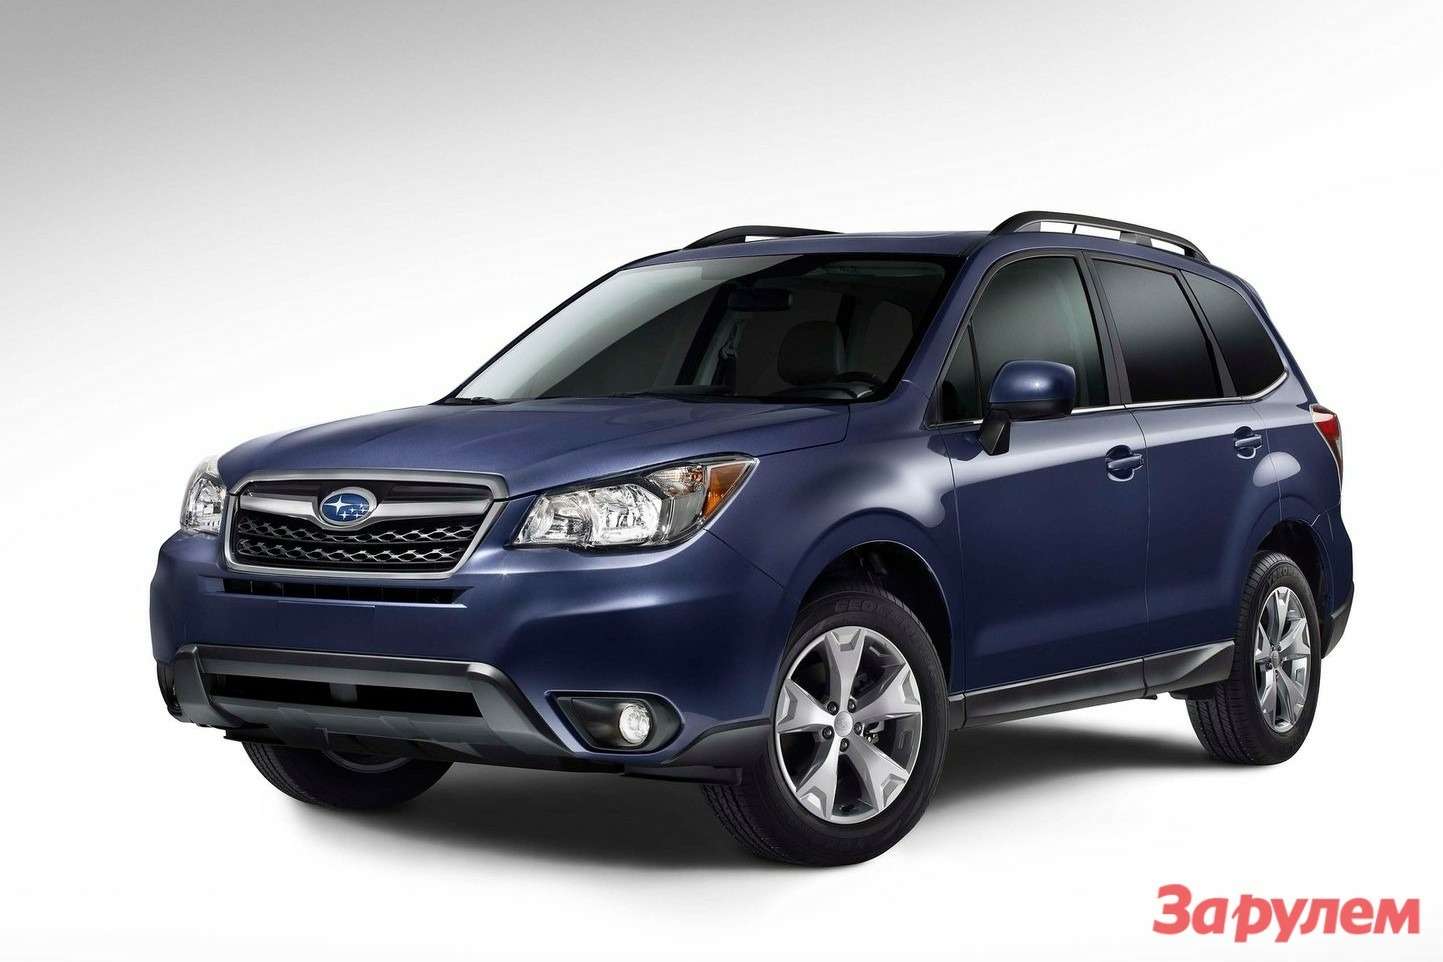 New Subaru Forester side-front view 2